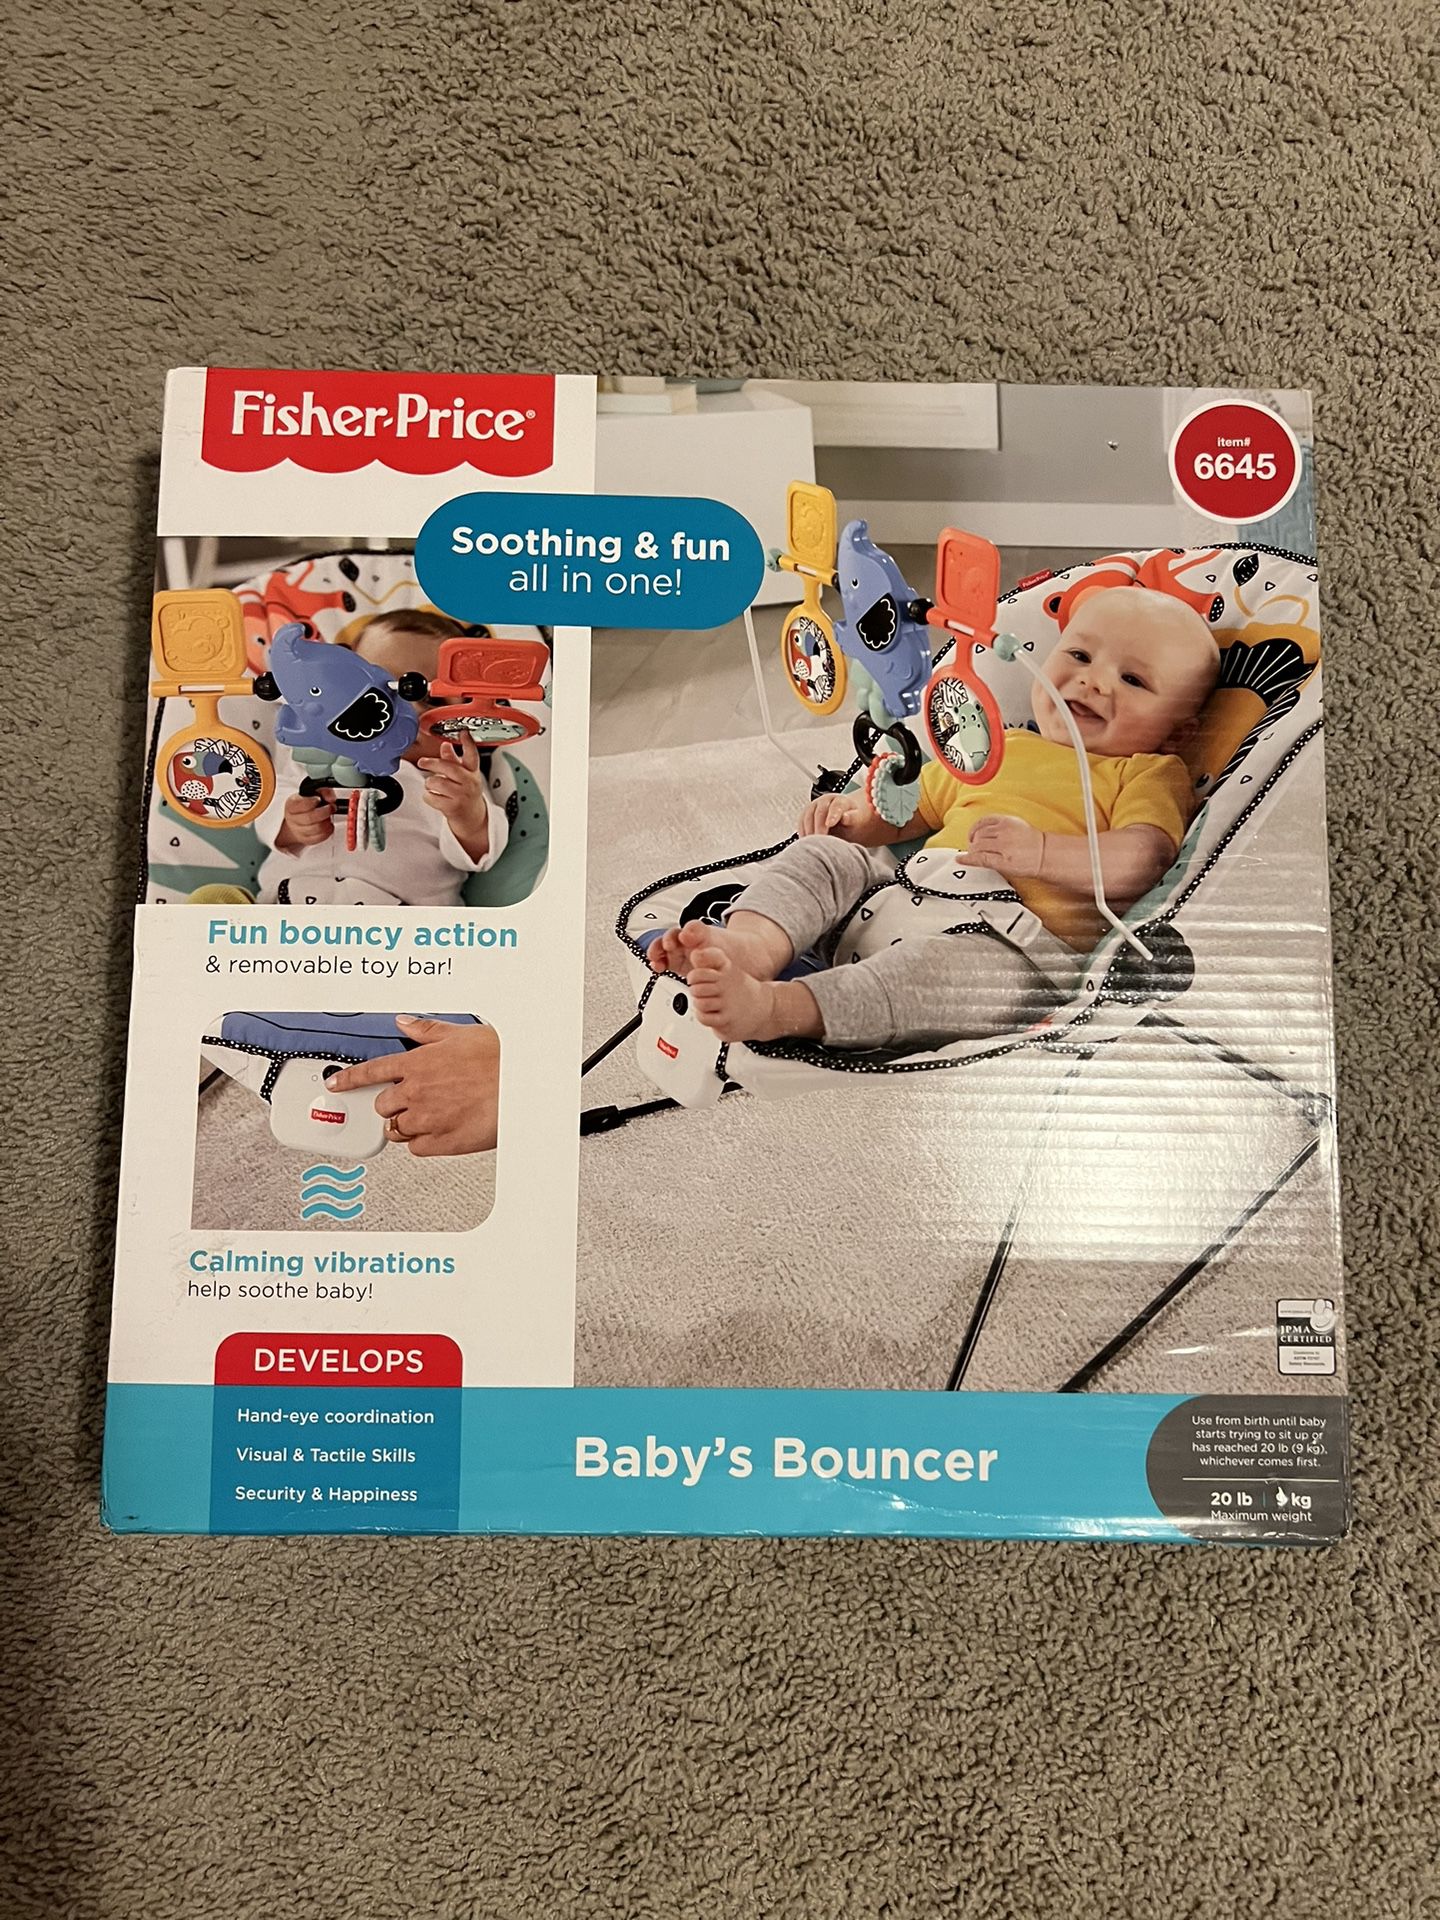 Baby’s Bouncer Fisher Price